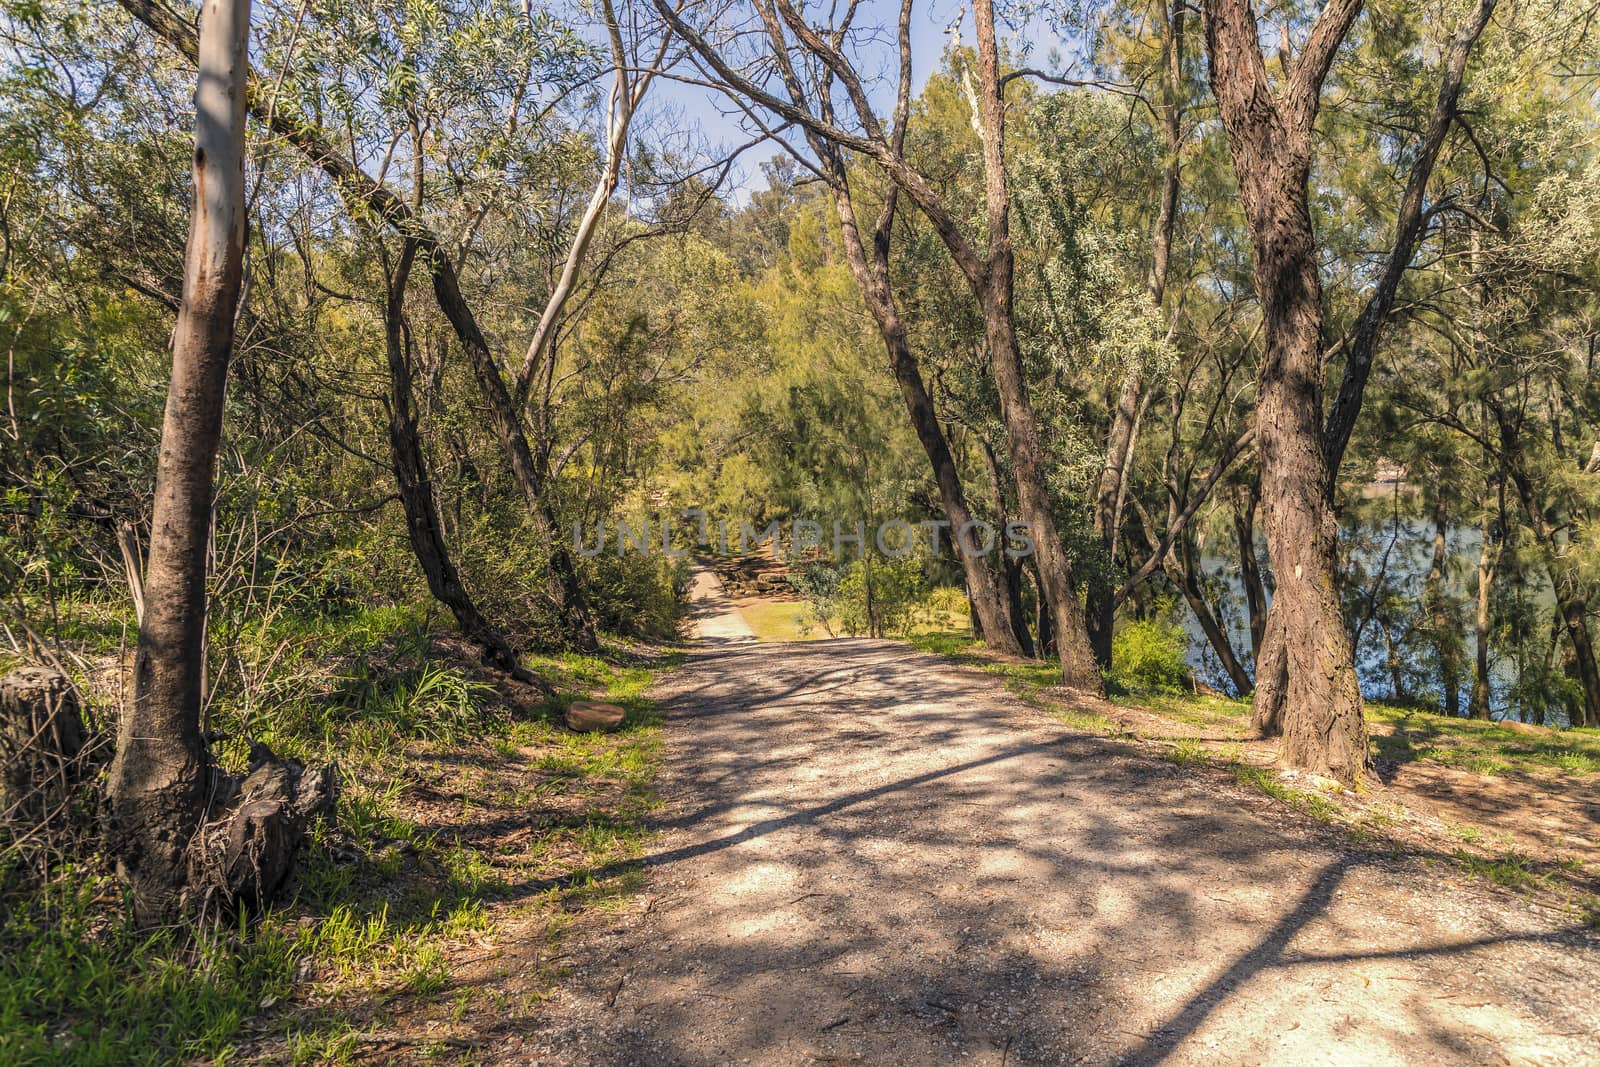 A dirt road in a forest in the outback in regional Australia by WittkePhotos